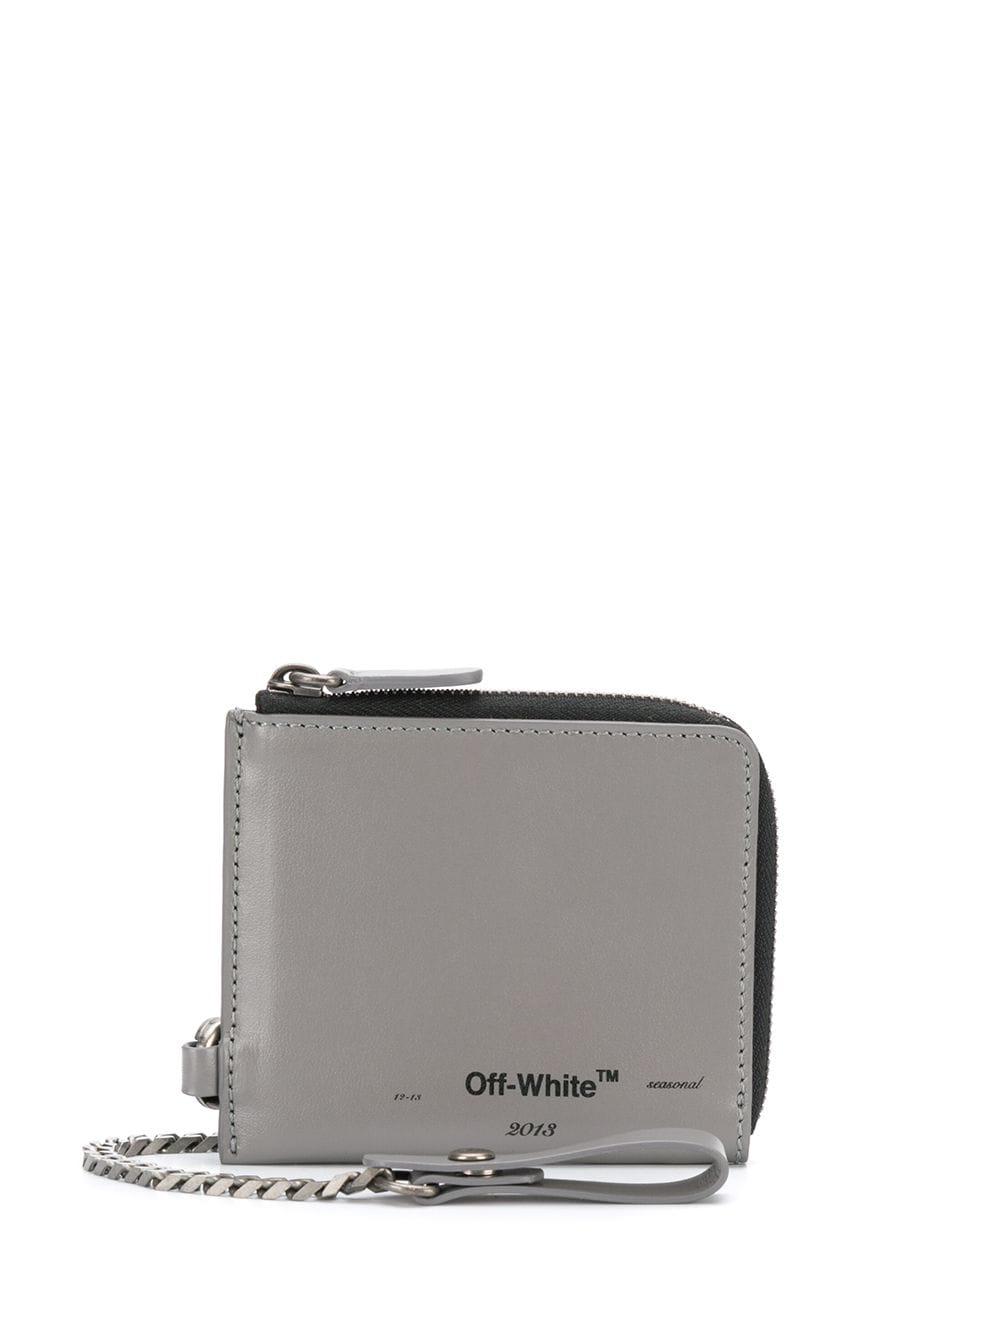 Off-White c/o Virgil Abloh Chain Strap Leather Wallet in Grey (Gray) for Men - Lyst